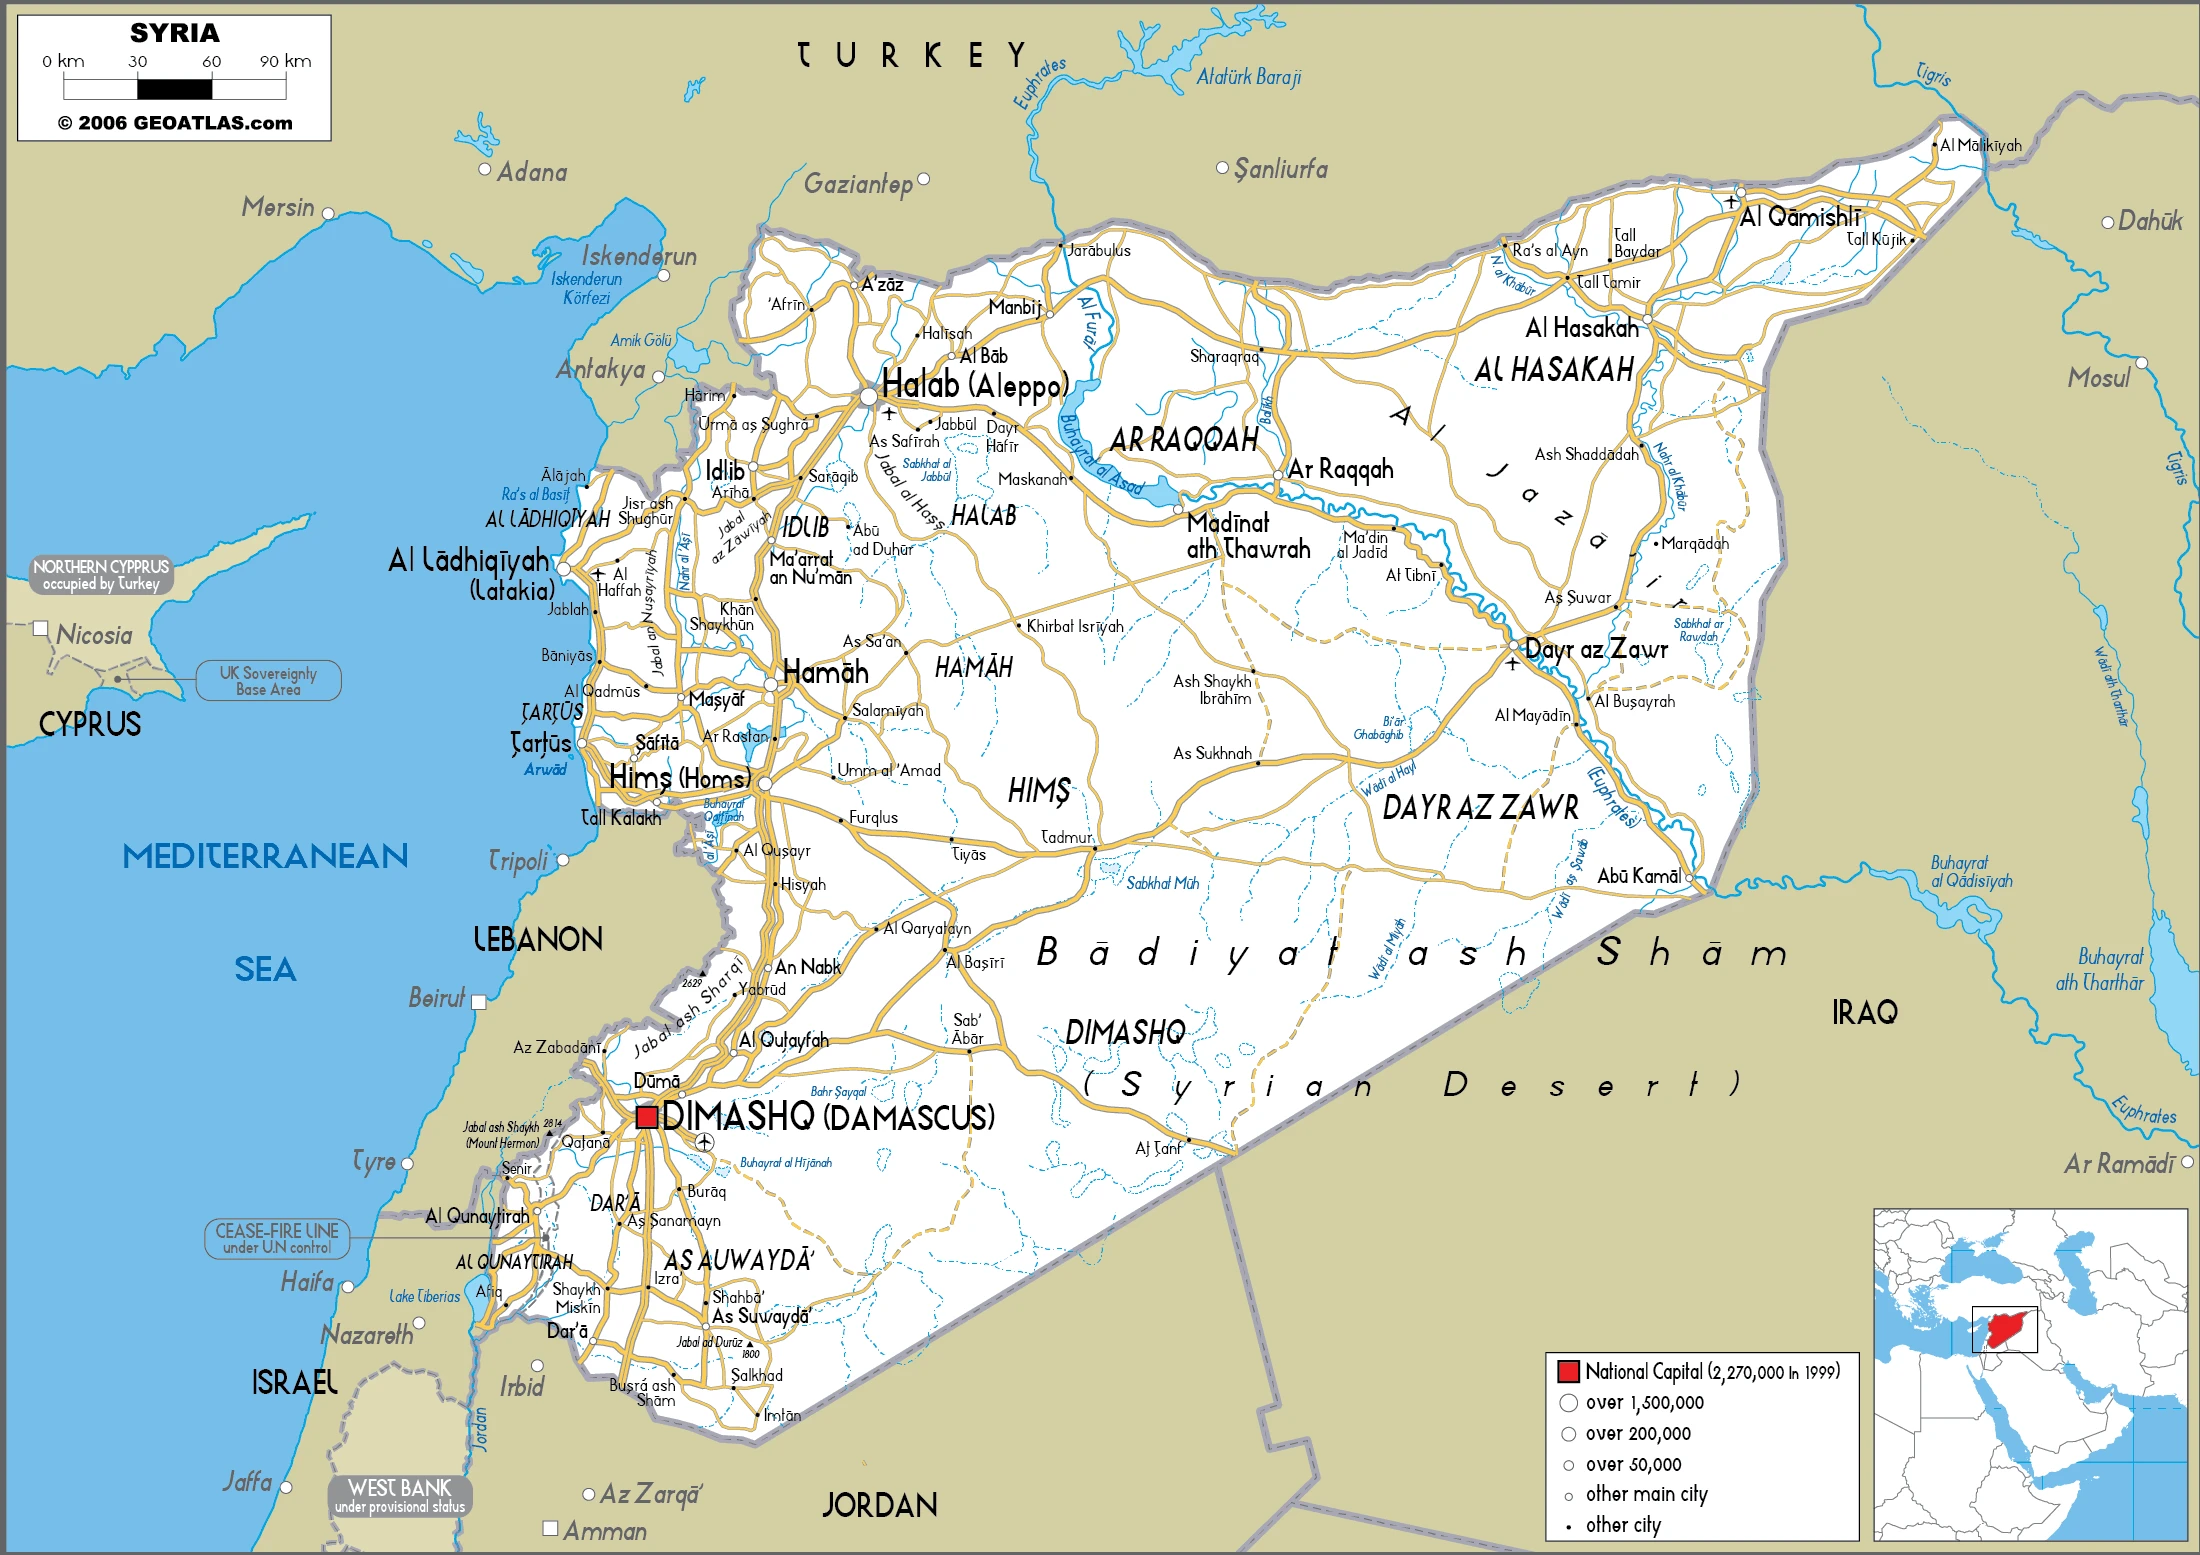 The route plan of the Syrian roadways.